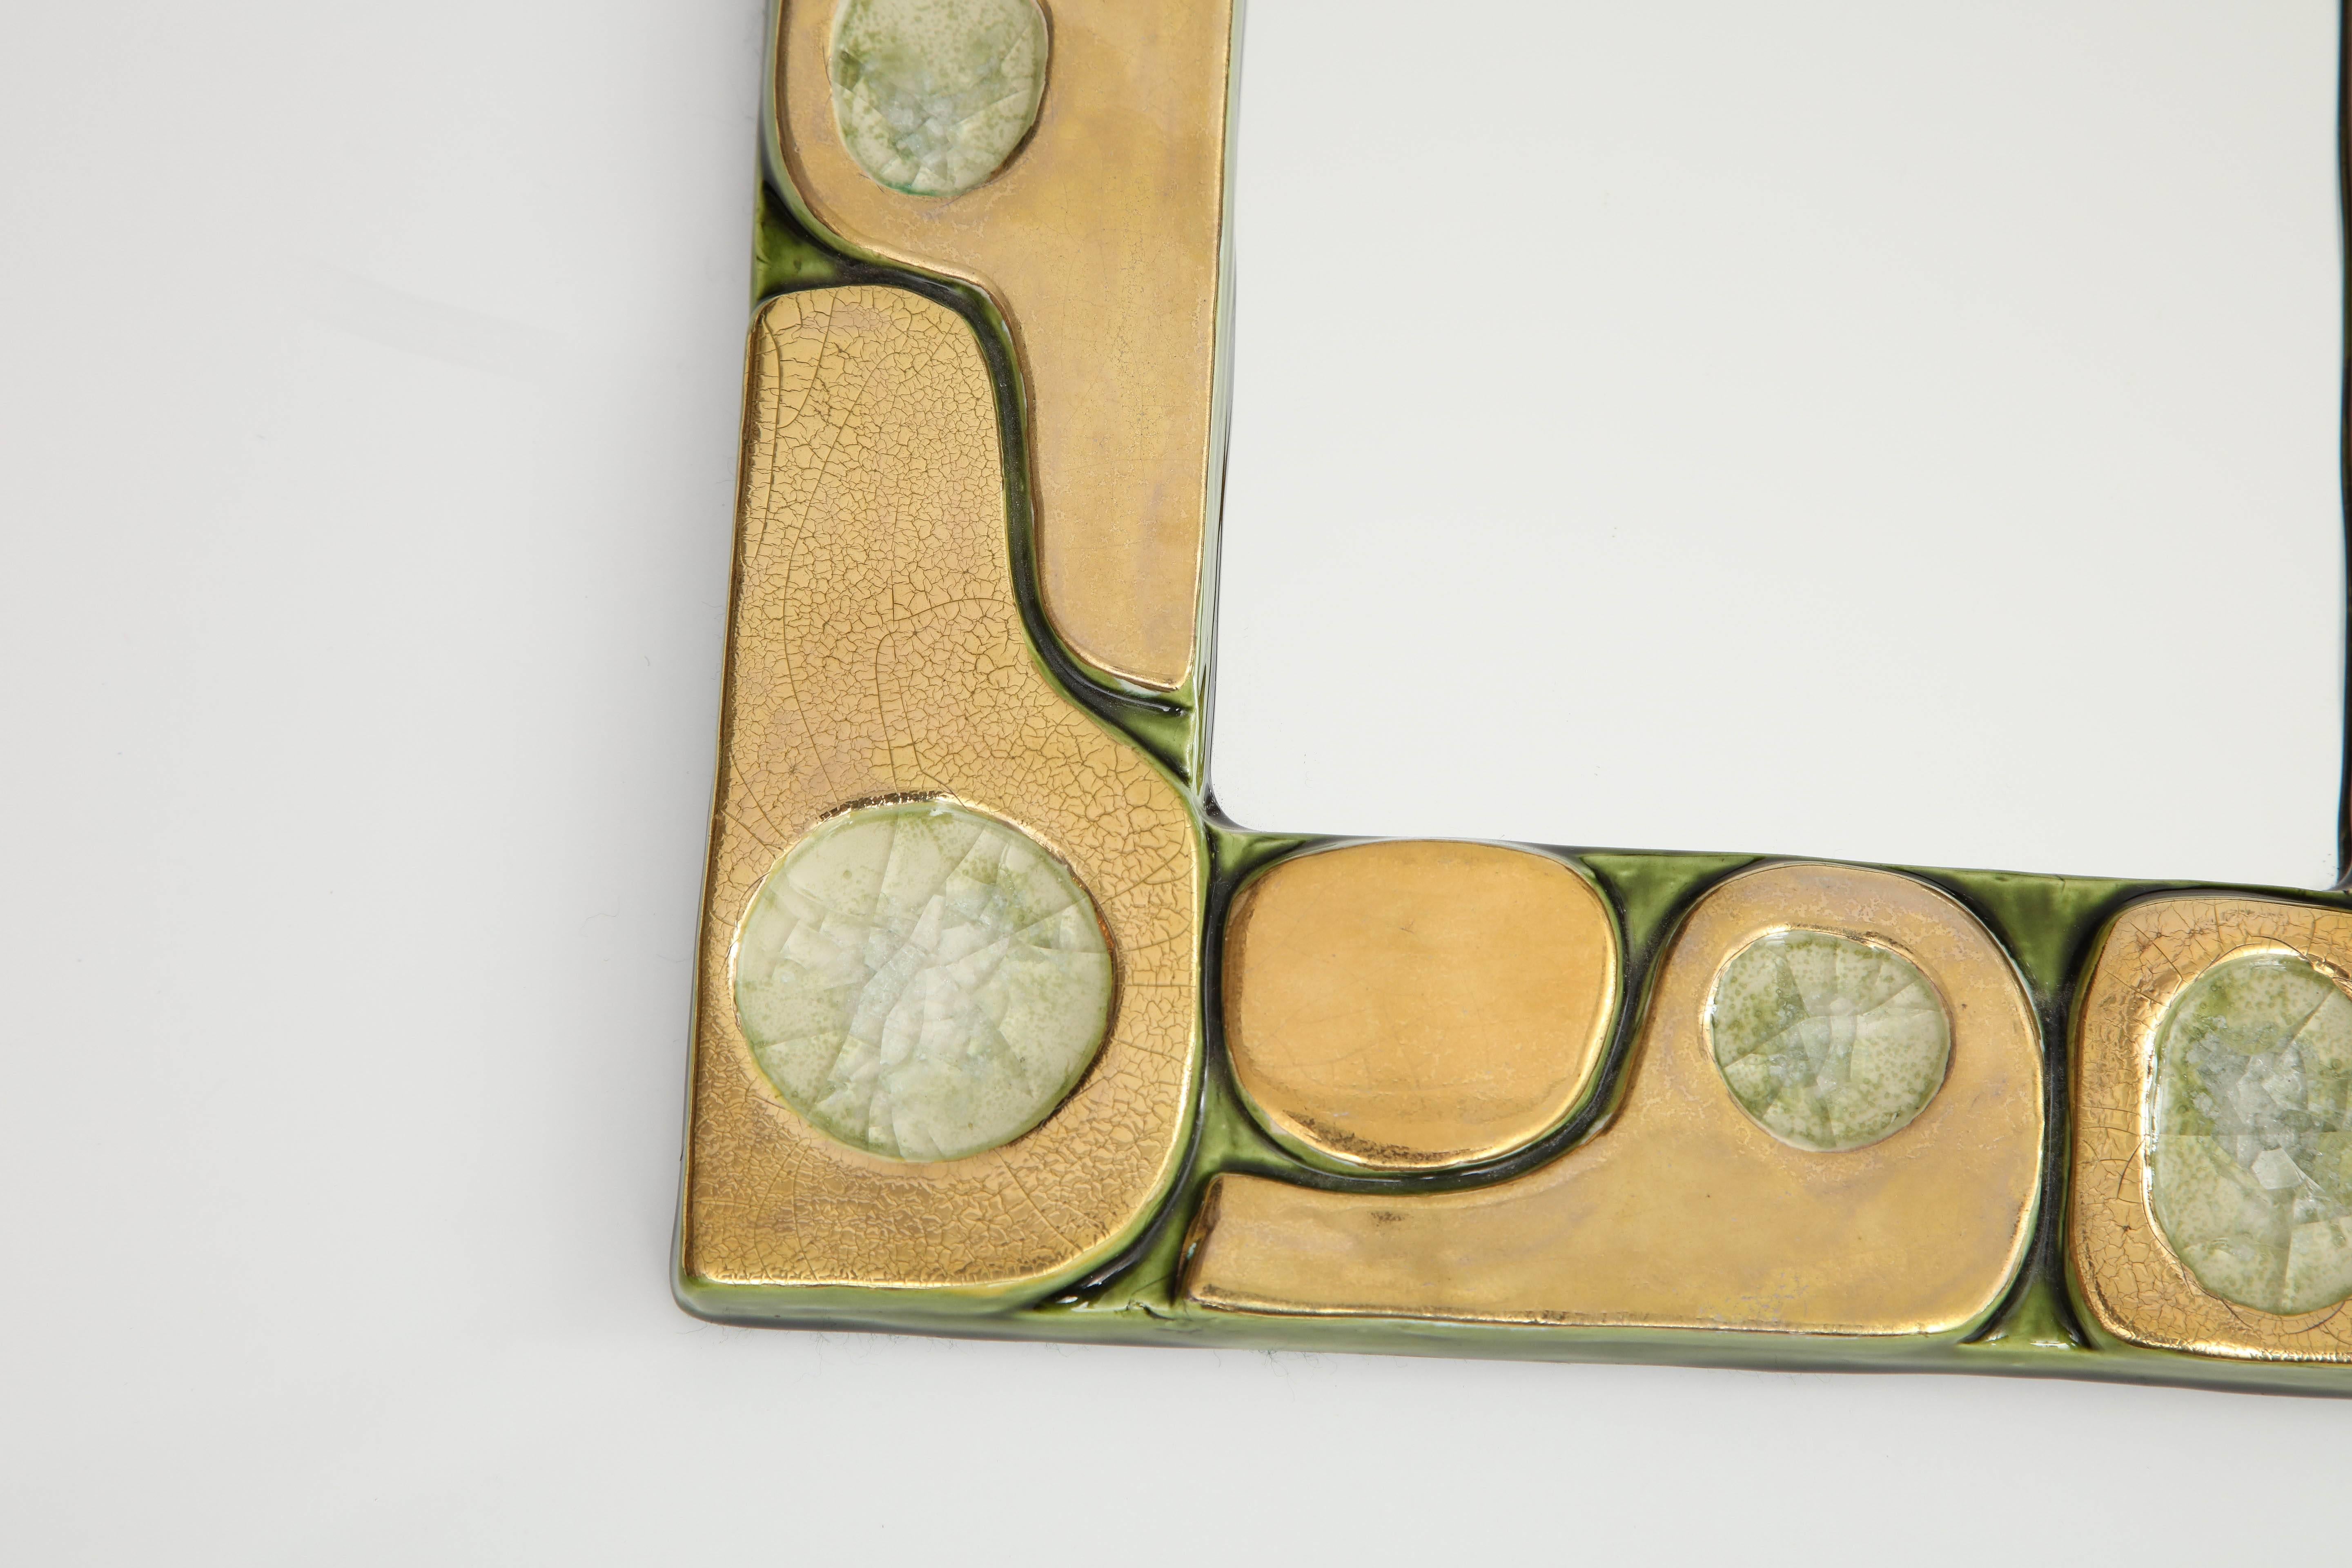 A small, but stunning mirror created by Mithé Espelt, circa 1960, in France. The mirror is composed of pieces of stone within a gold crackle glazed ceramic frame. The border of the frame is painted in a green enamel and the back is felt.